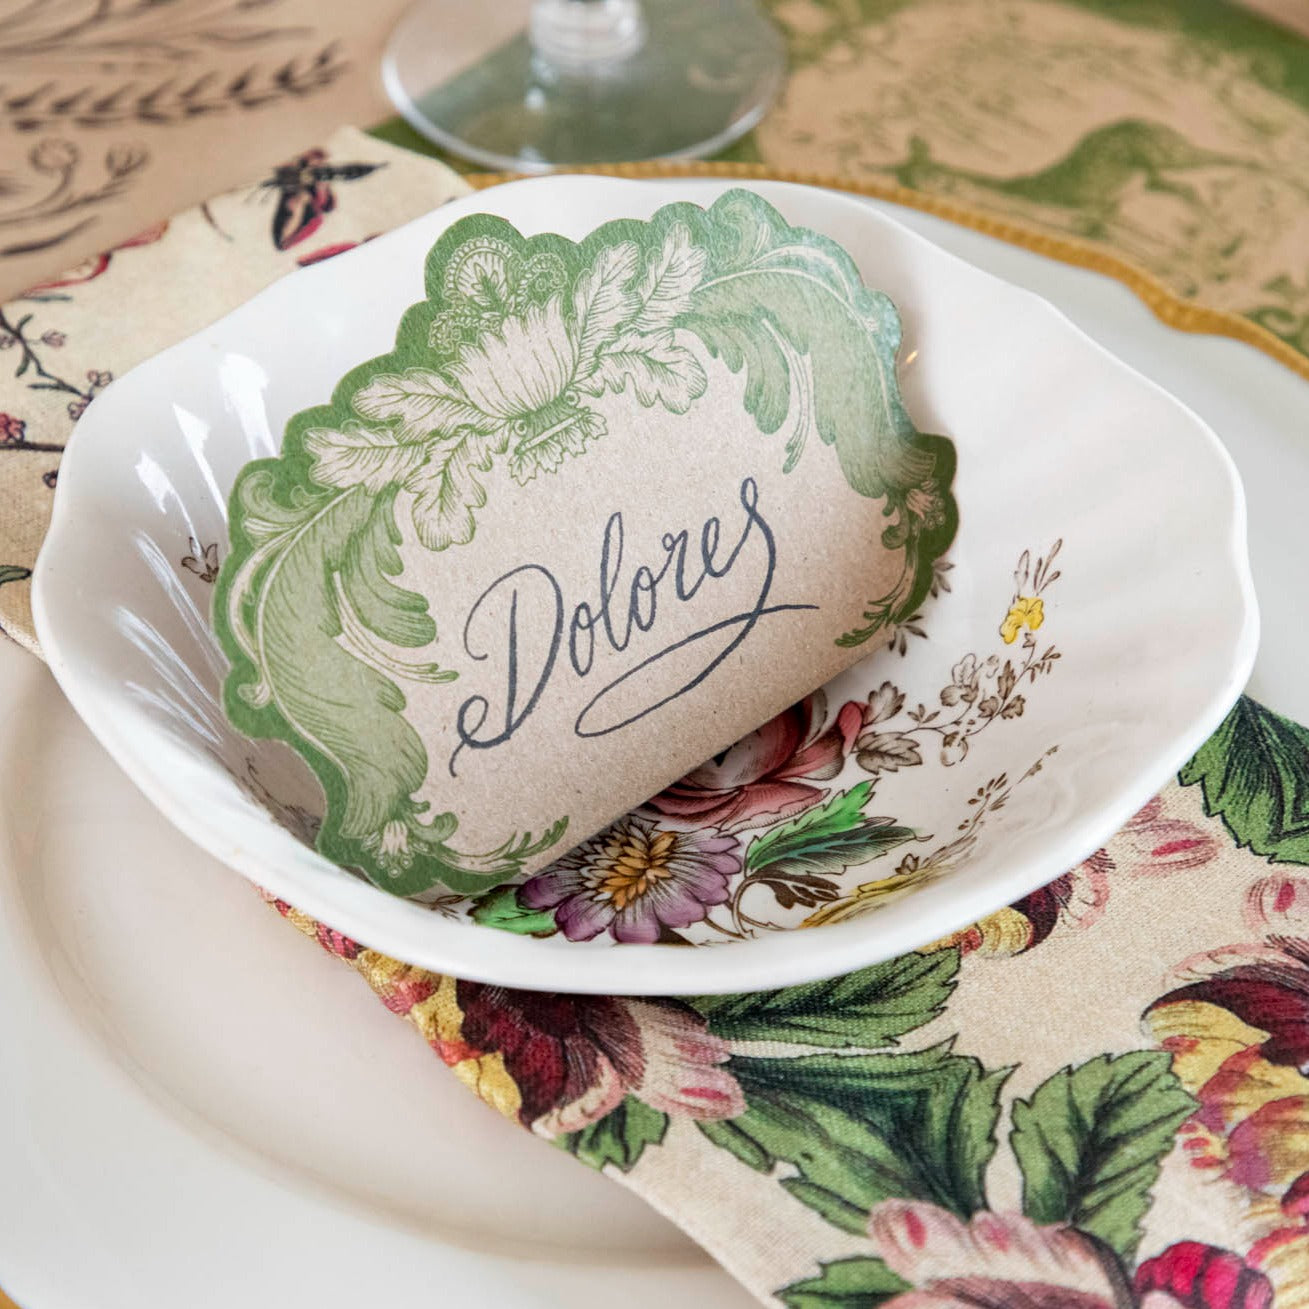 An elegant place setting featuring a Moss Fable Toile Place Card labeled &quot;Dolored&quot; standing in the bowl.